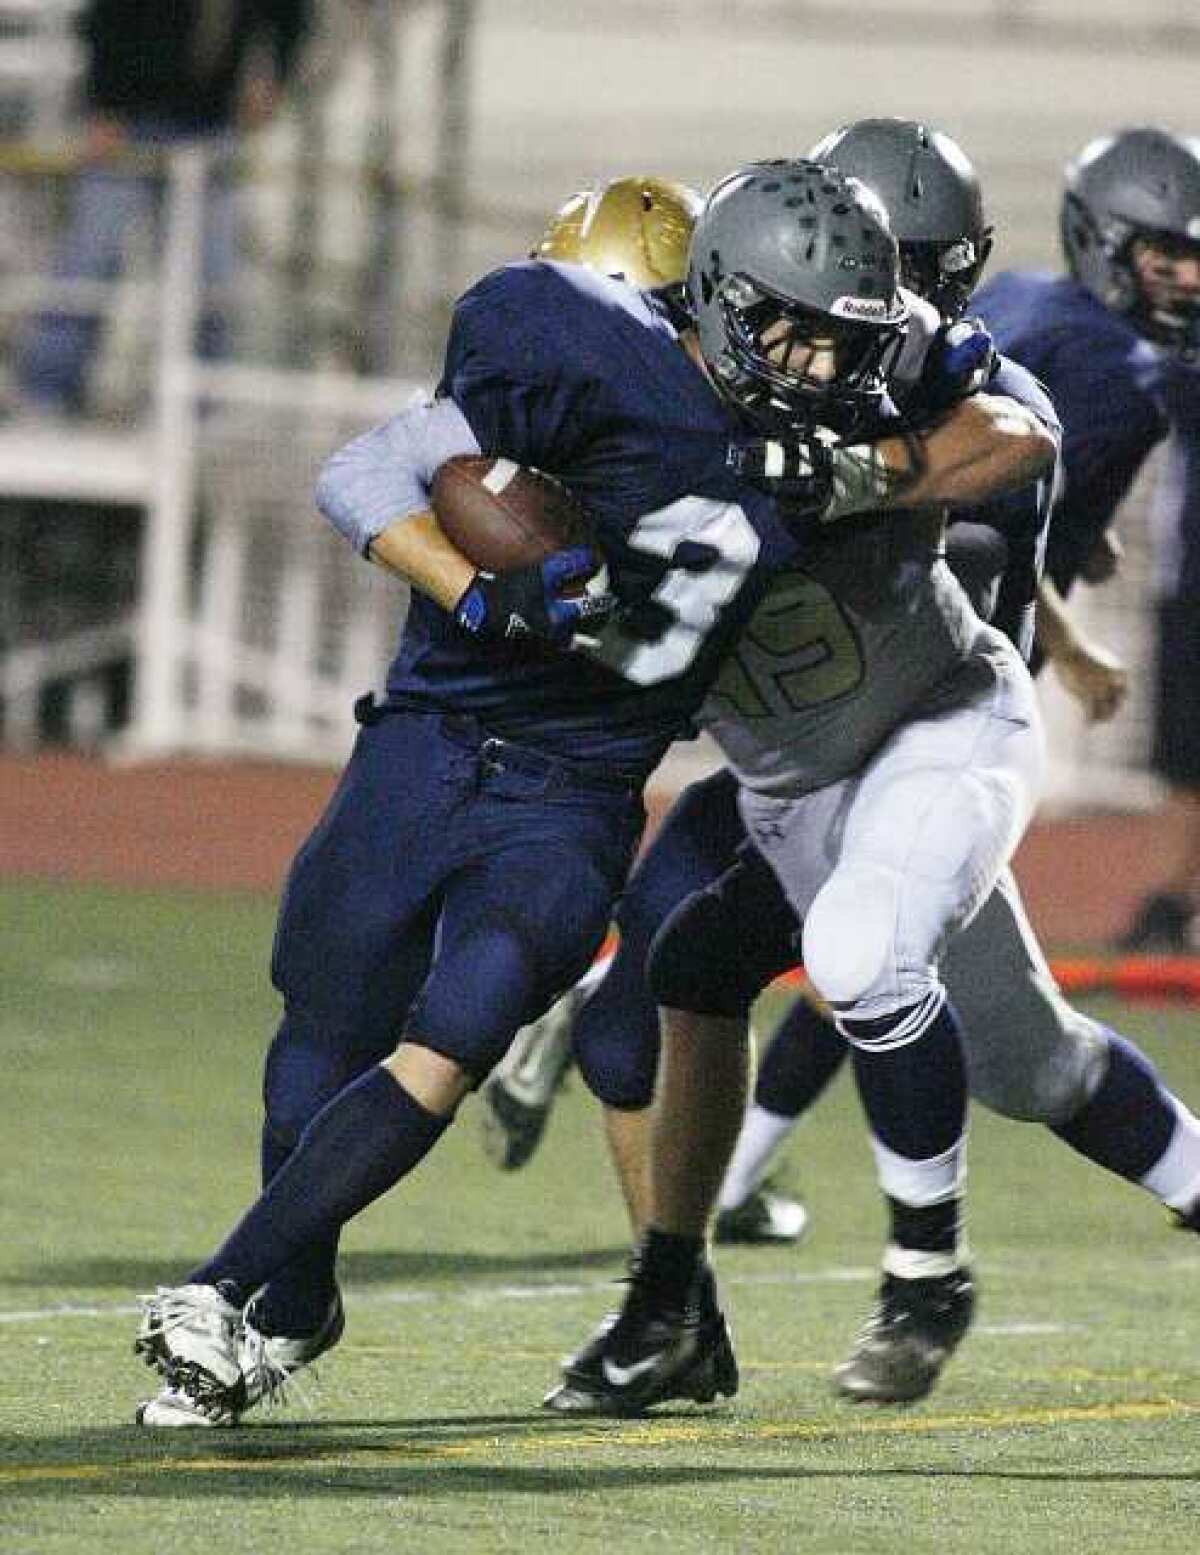 Flintridge Prep's running back Stefan Smith rushed for 121 yards and two touchdowns and made two interceptions on defense.